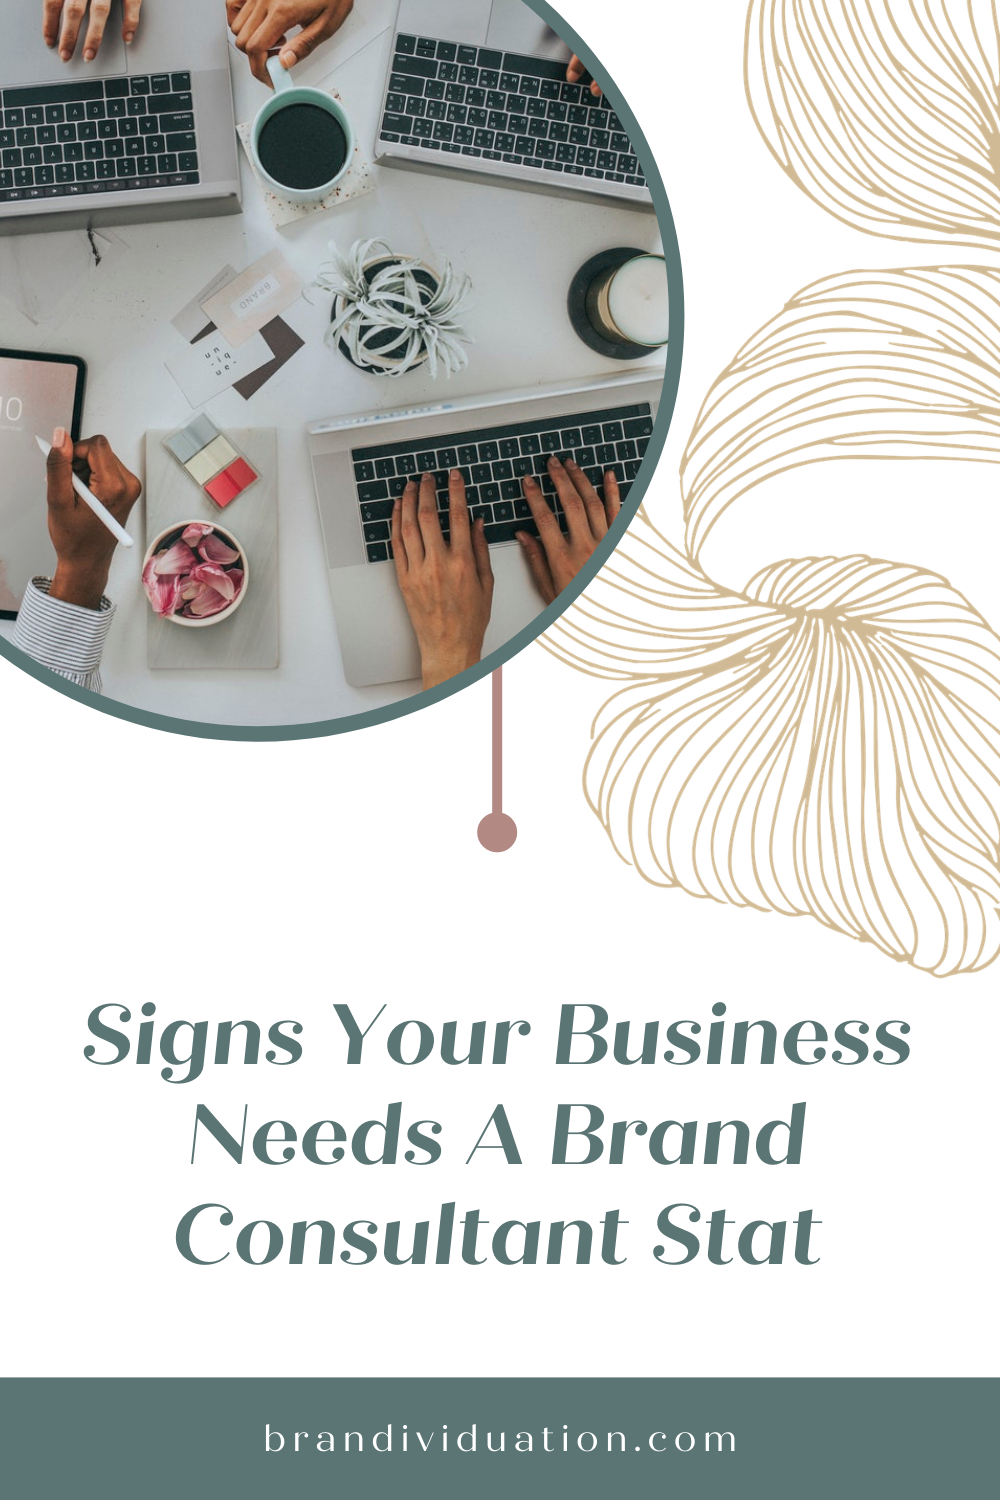 Signs Your Business Needs A Brand Consultant Stat